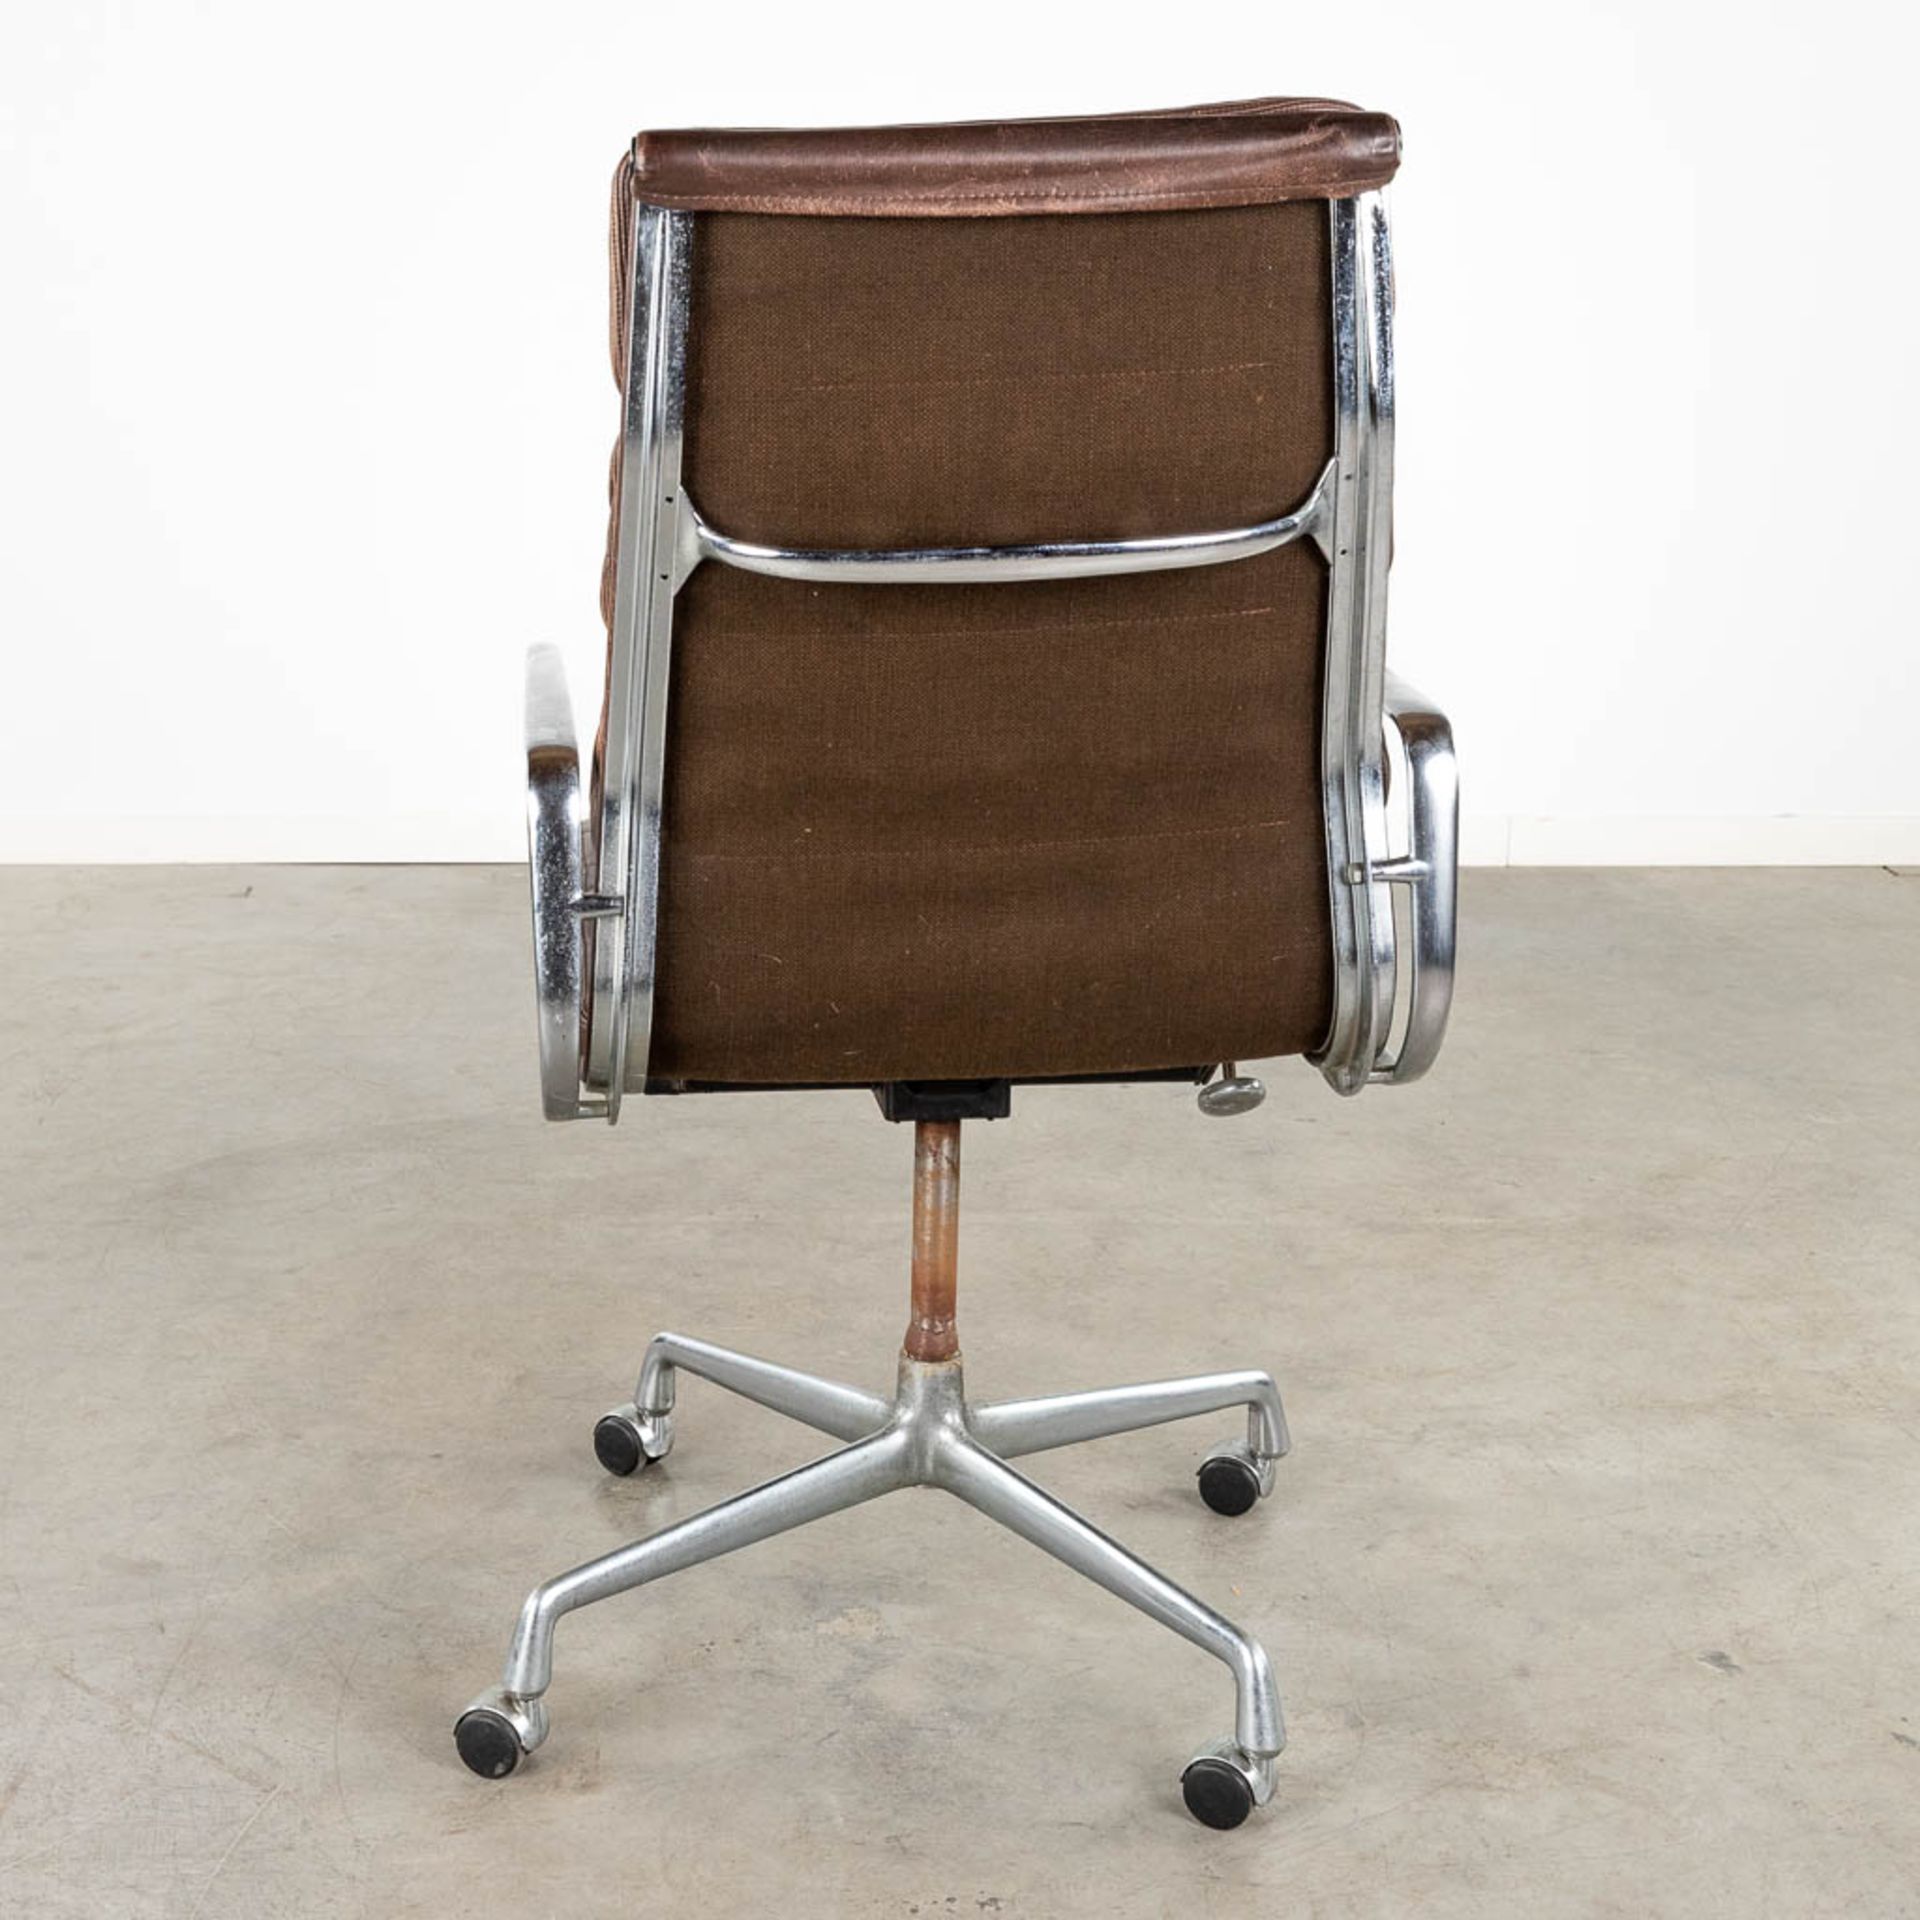 Charles &amp; Ray EAMES (XX-XXI) 'Soft Pad Office Chair' for Herman Miller. (D:111 x W:59 x H:63 cm) - Image 5 of 12